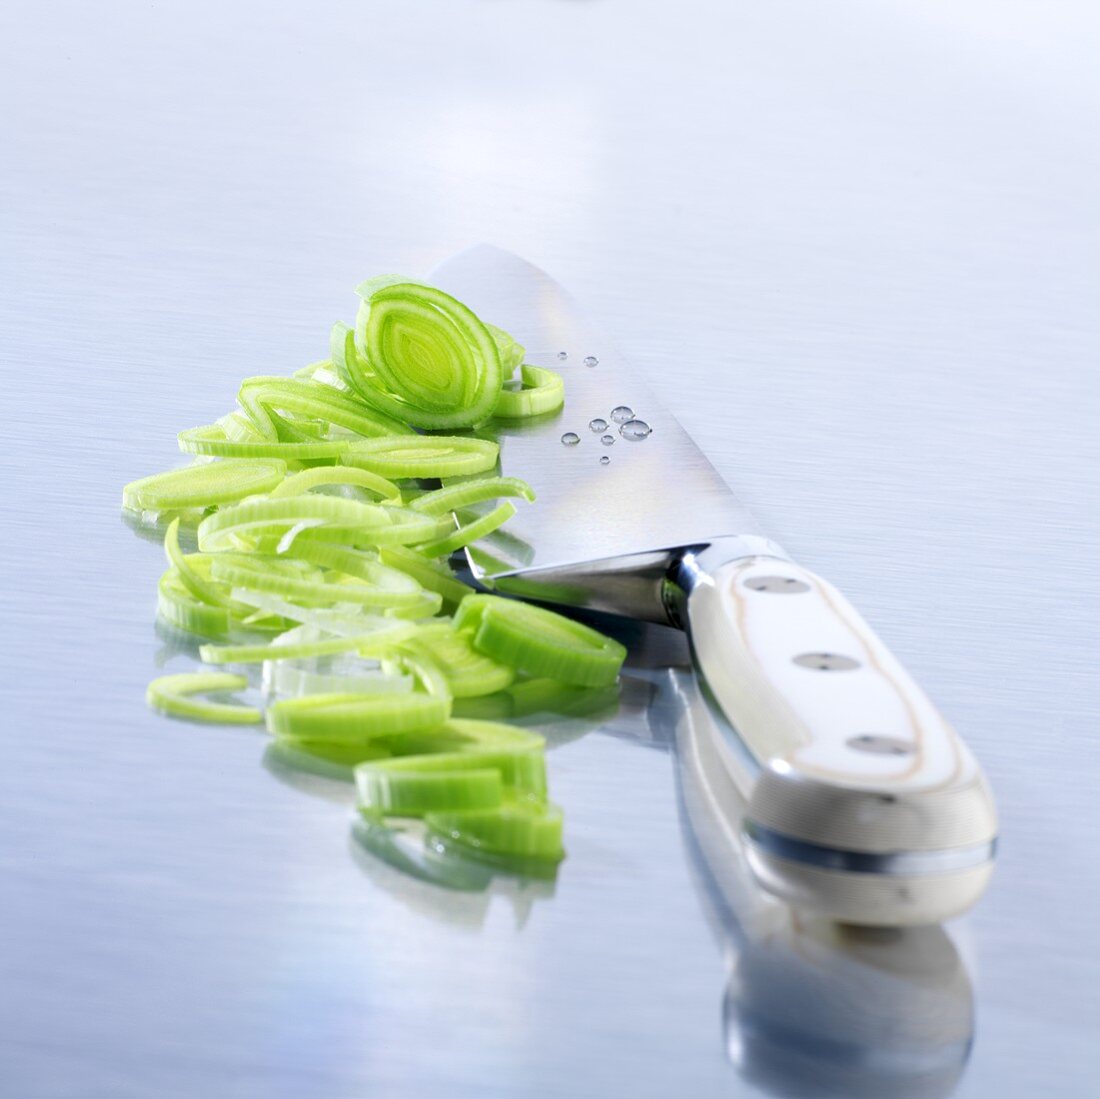 Leek rings and a kitchen knife